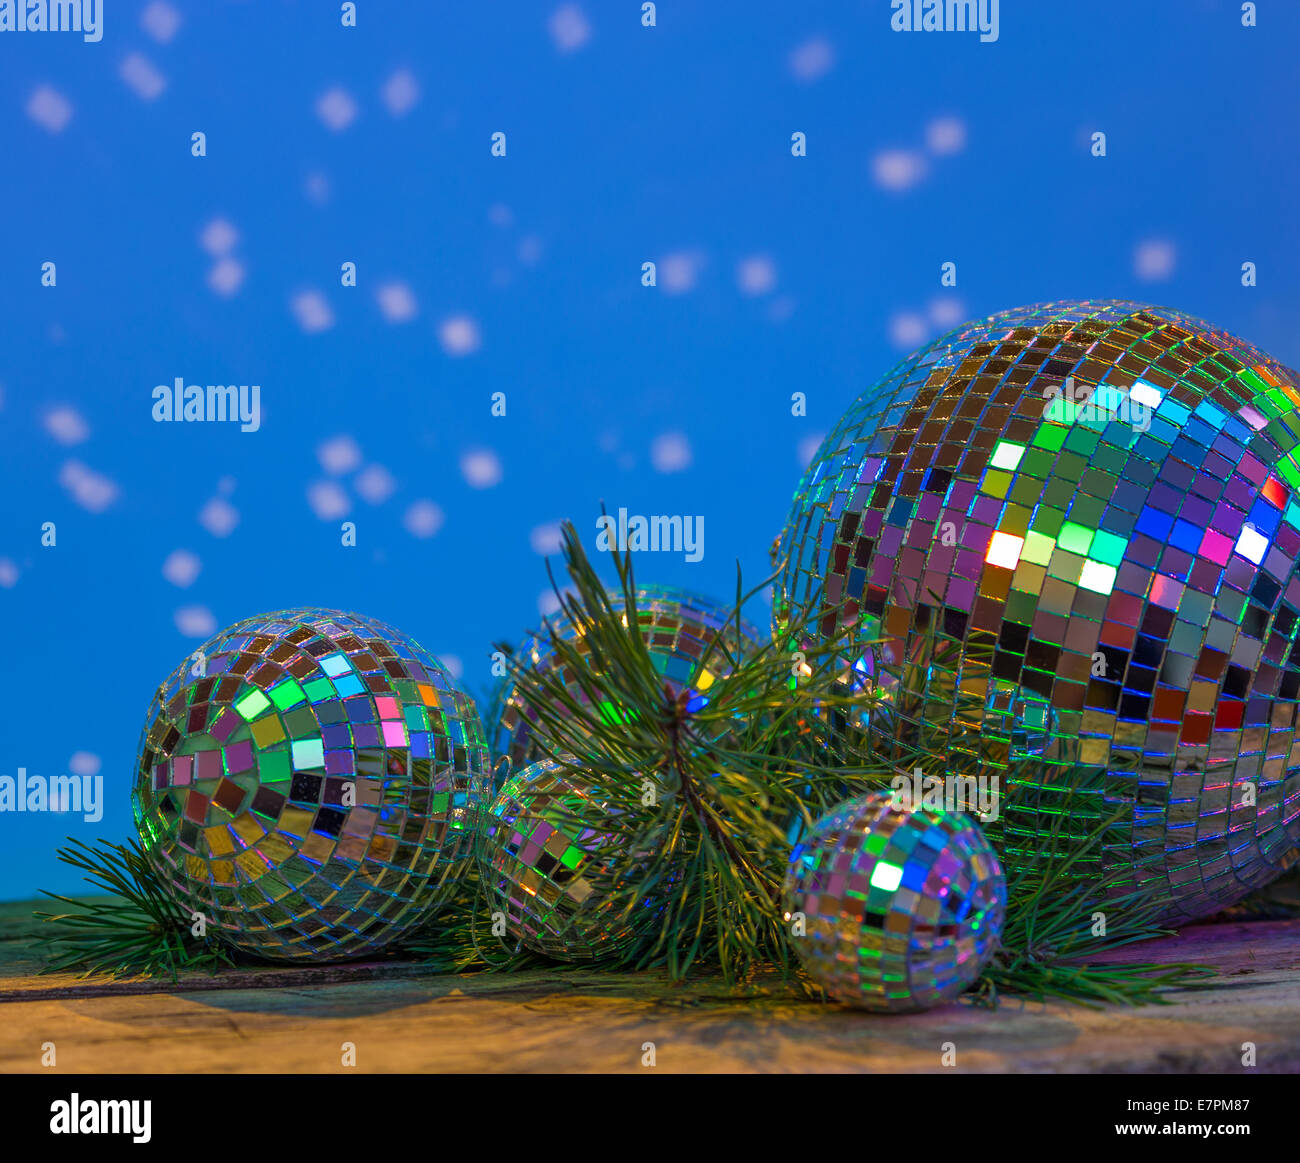 Creative Christmas concept. Shiny gold disco balls over red background.  Flat lay, top view. New year Stock Photo by jchizhe